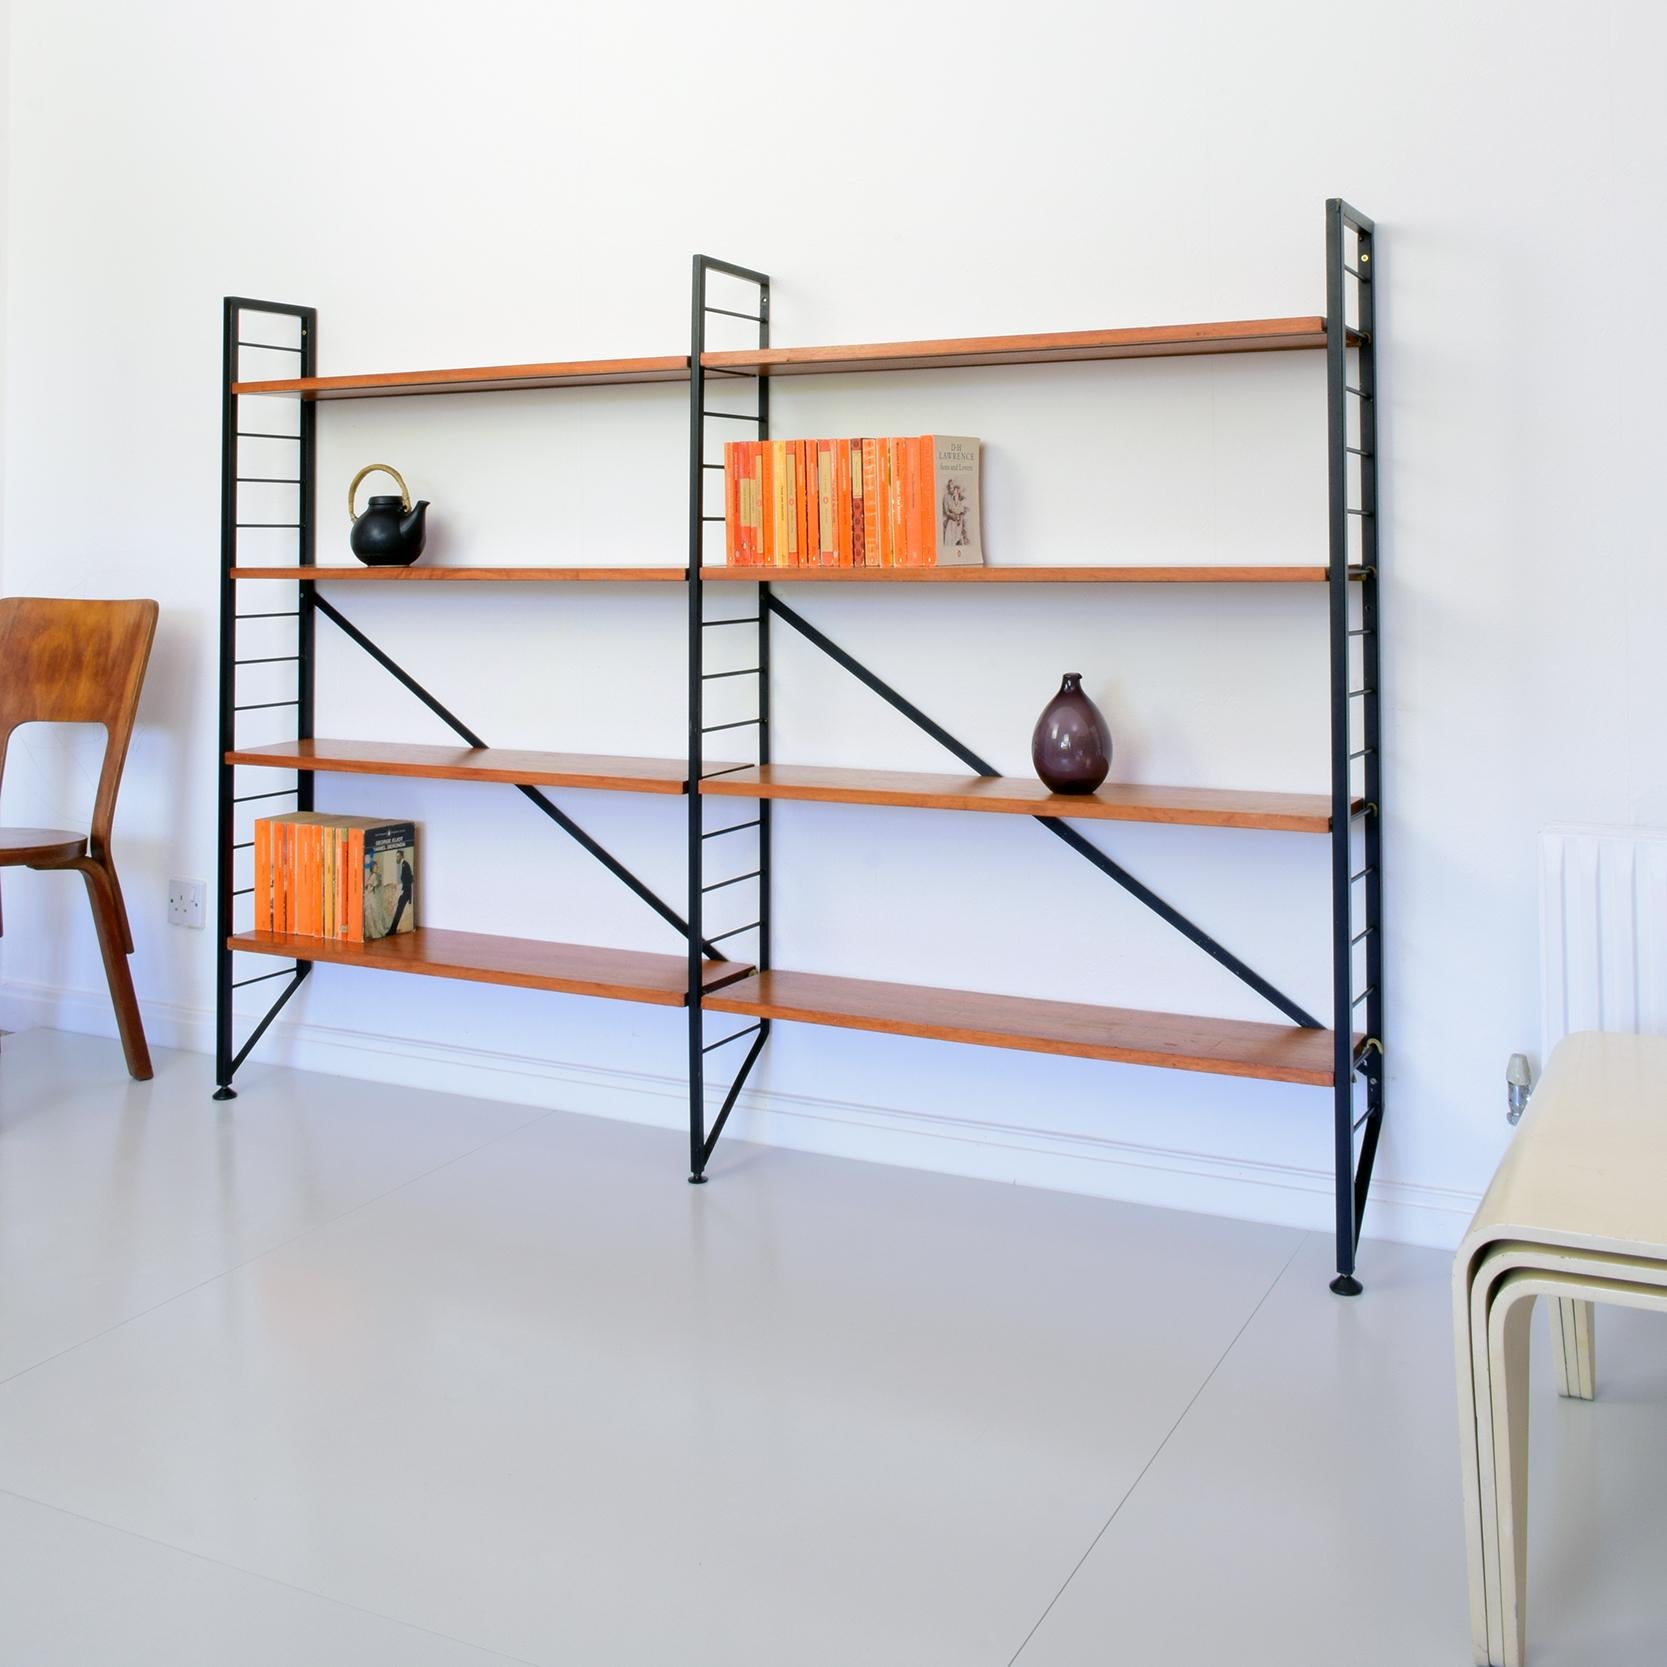 Robert Heal for Staples, 1964
'Ladderax' shelving system

Two bay system with eight wooden shelves (each with two recessed metal supports), three metal uprights (two end uprights and one central upright) and two metal diagonal-braces. The shelves